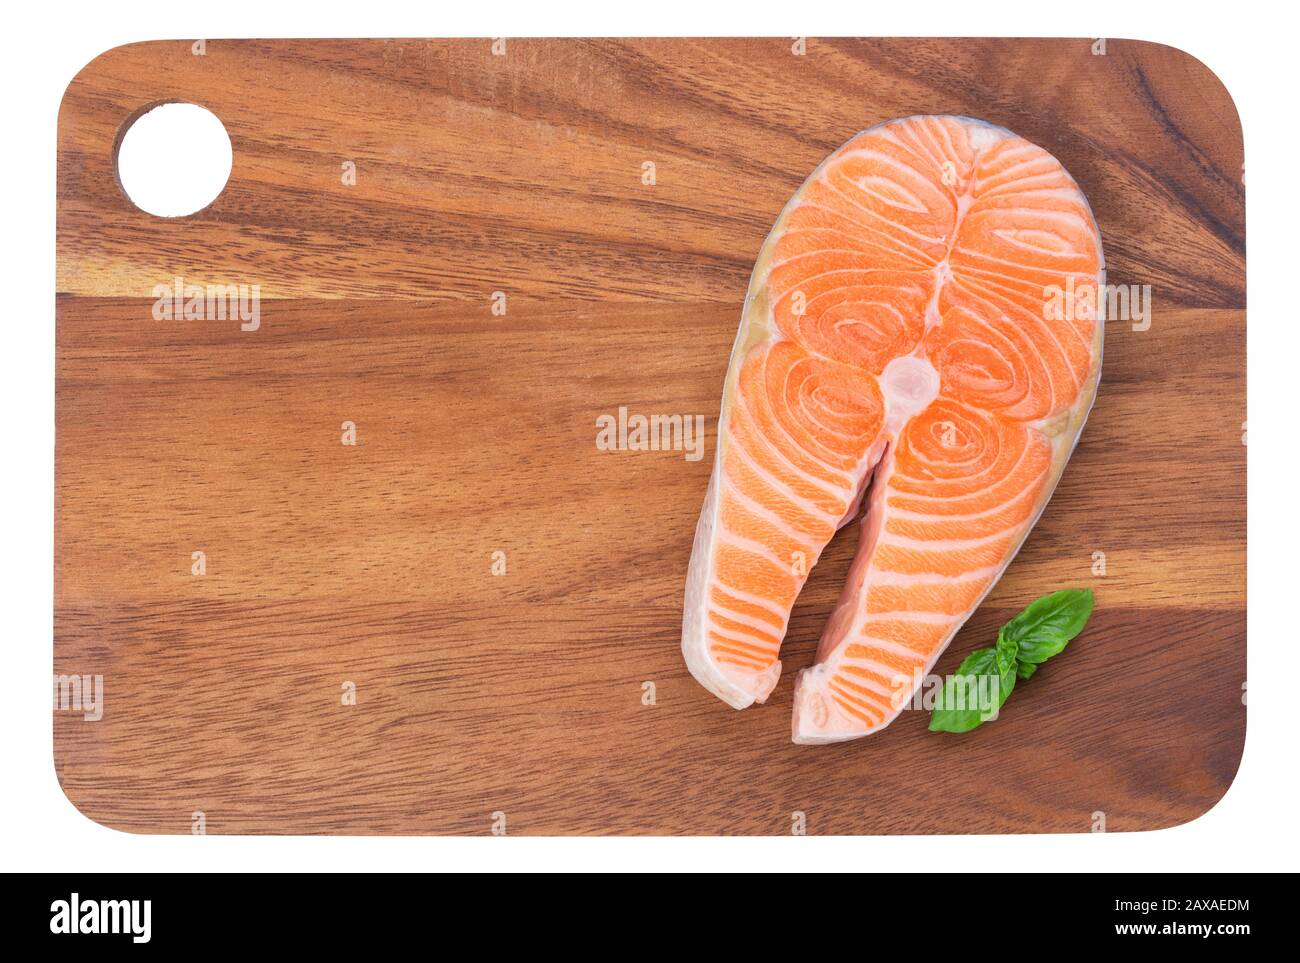 The only raw steak of wild salmon on a wooden kitchen board Stock Photo